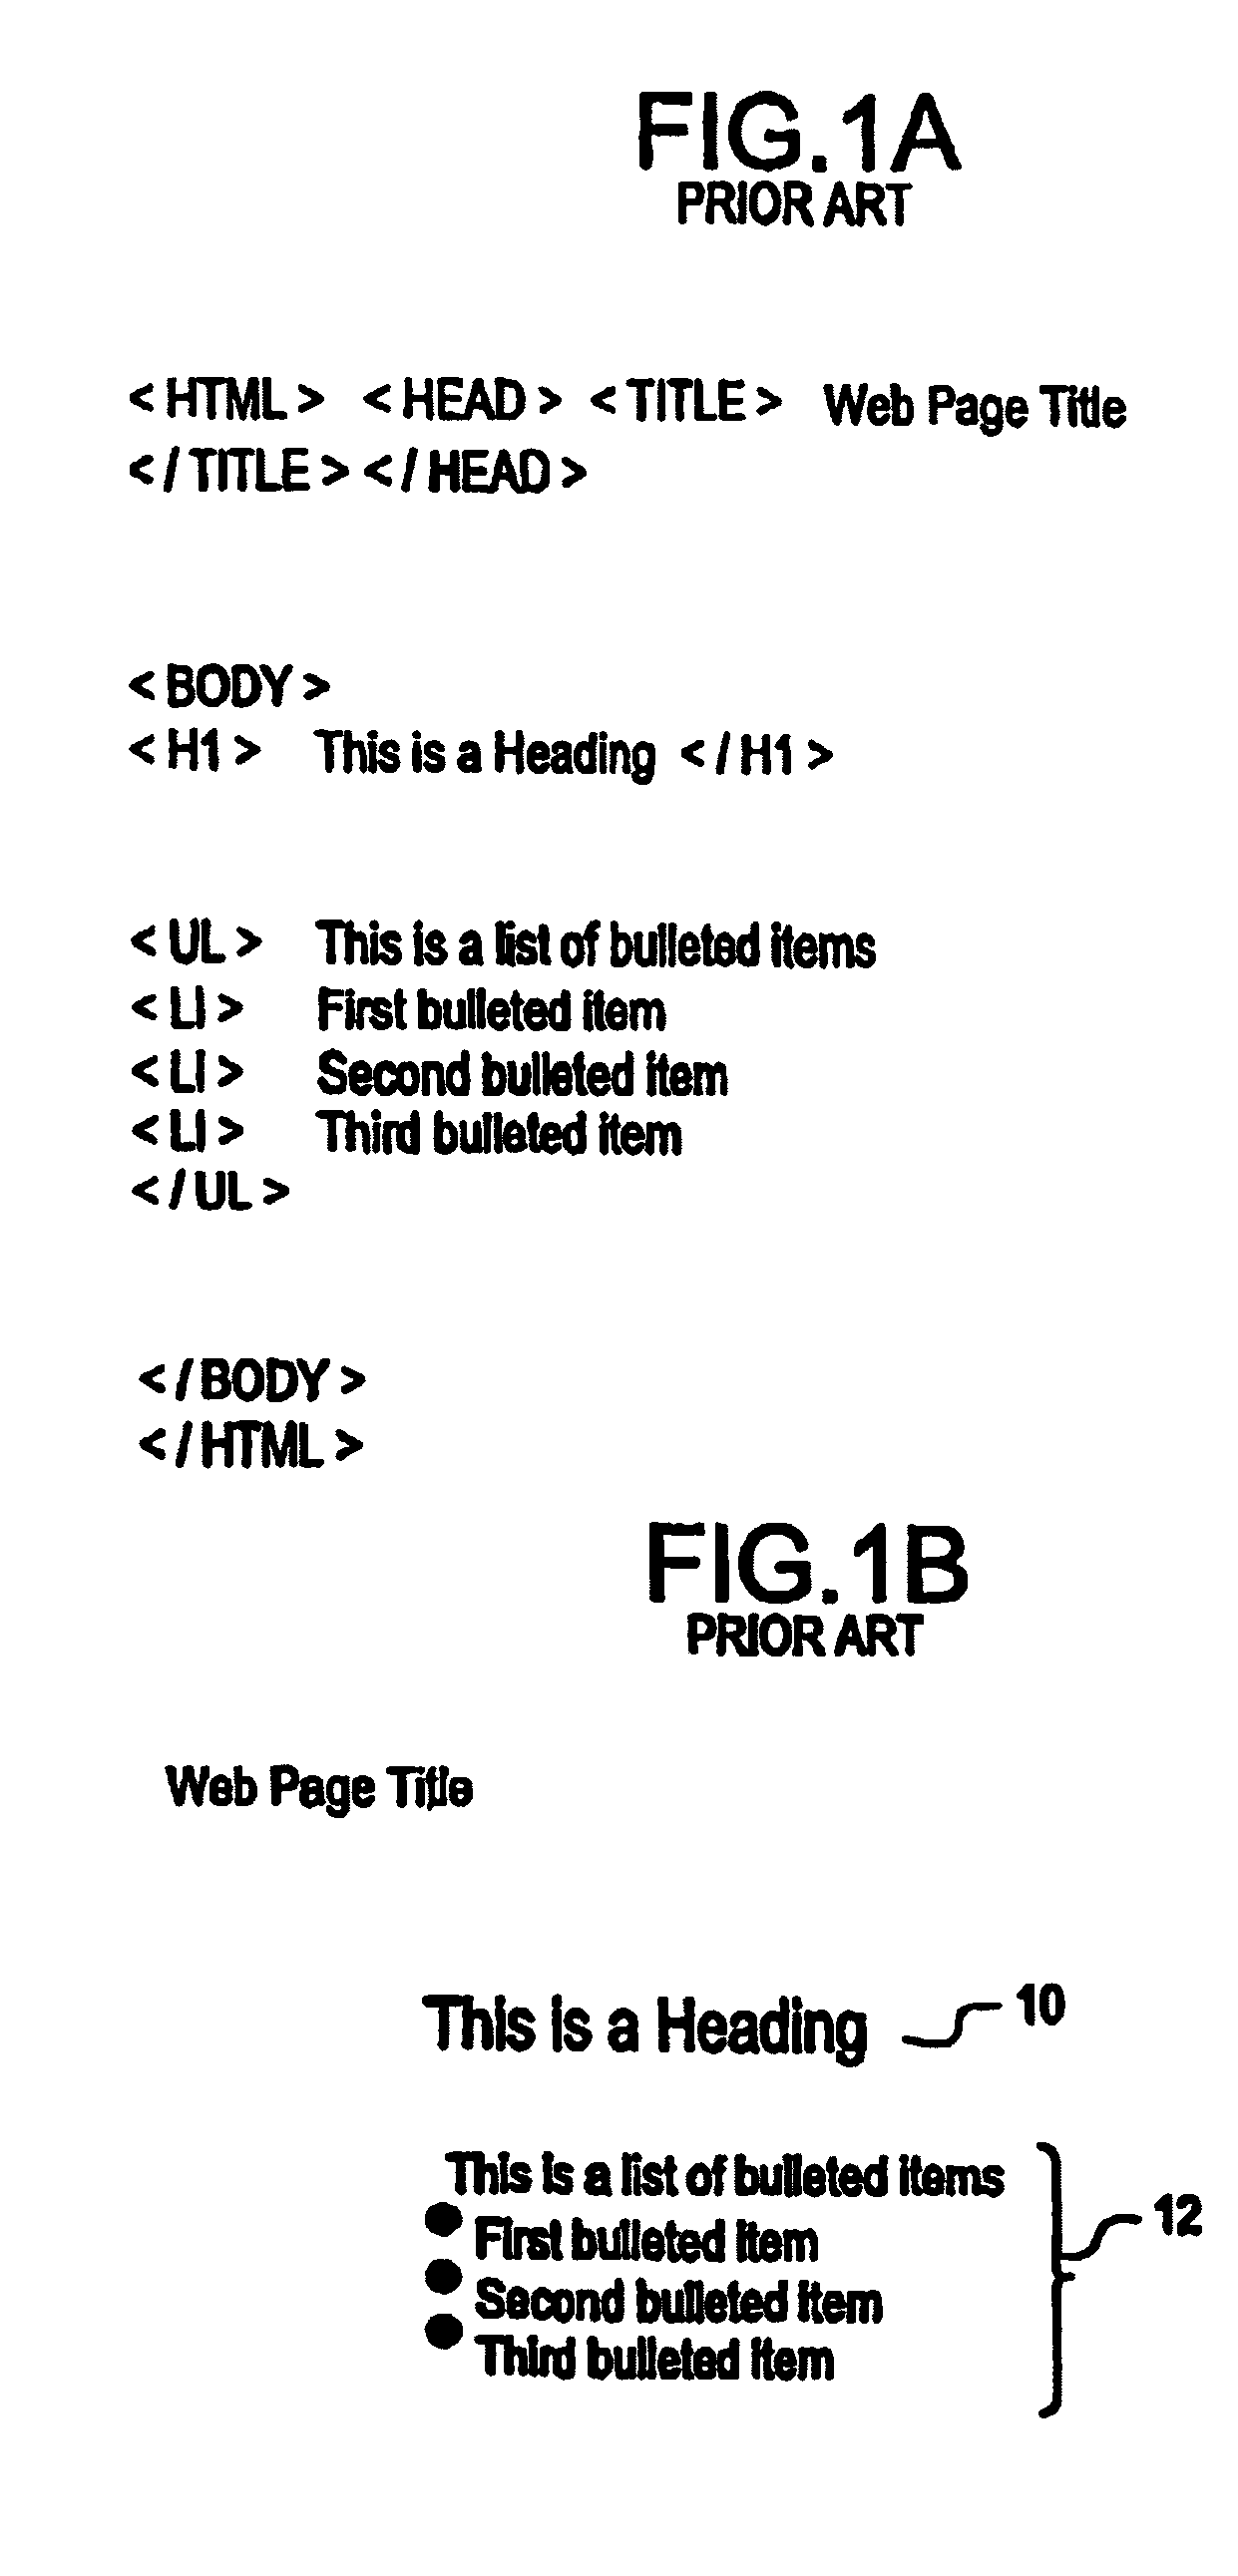 Method and system for generating materials for presentation on a non-frame capable web browser